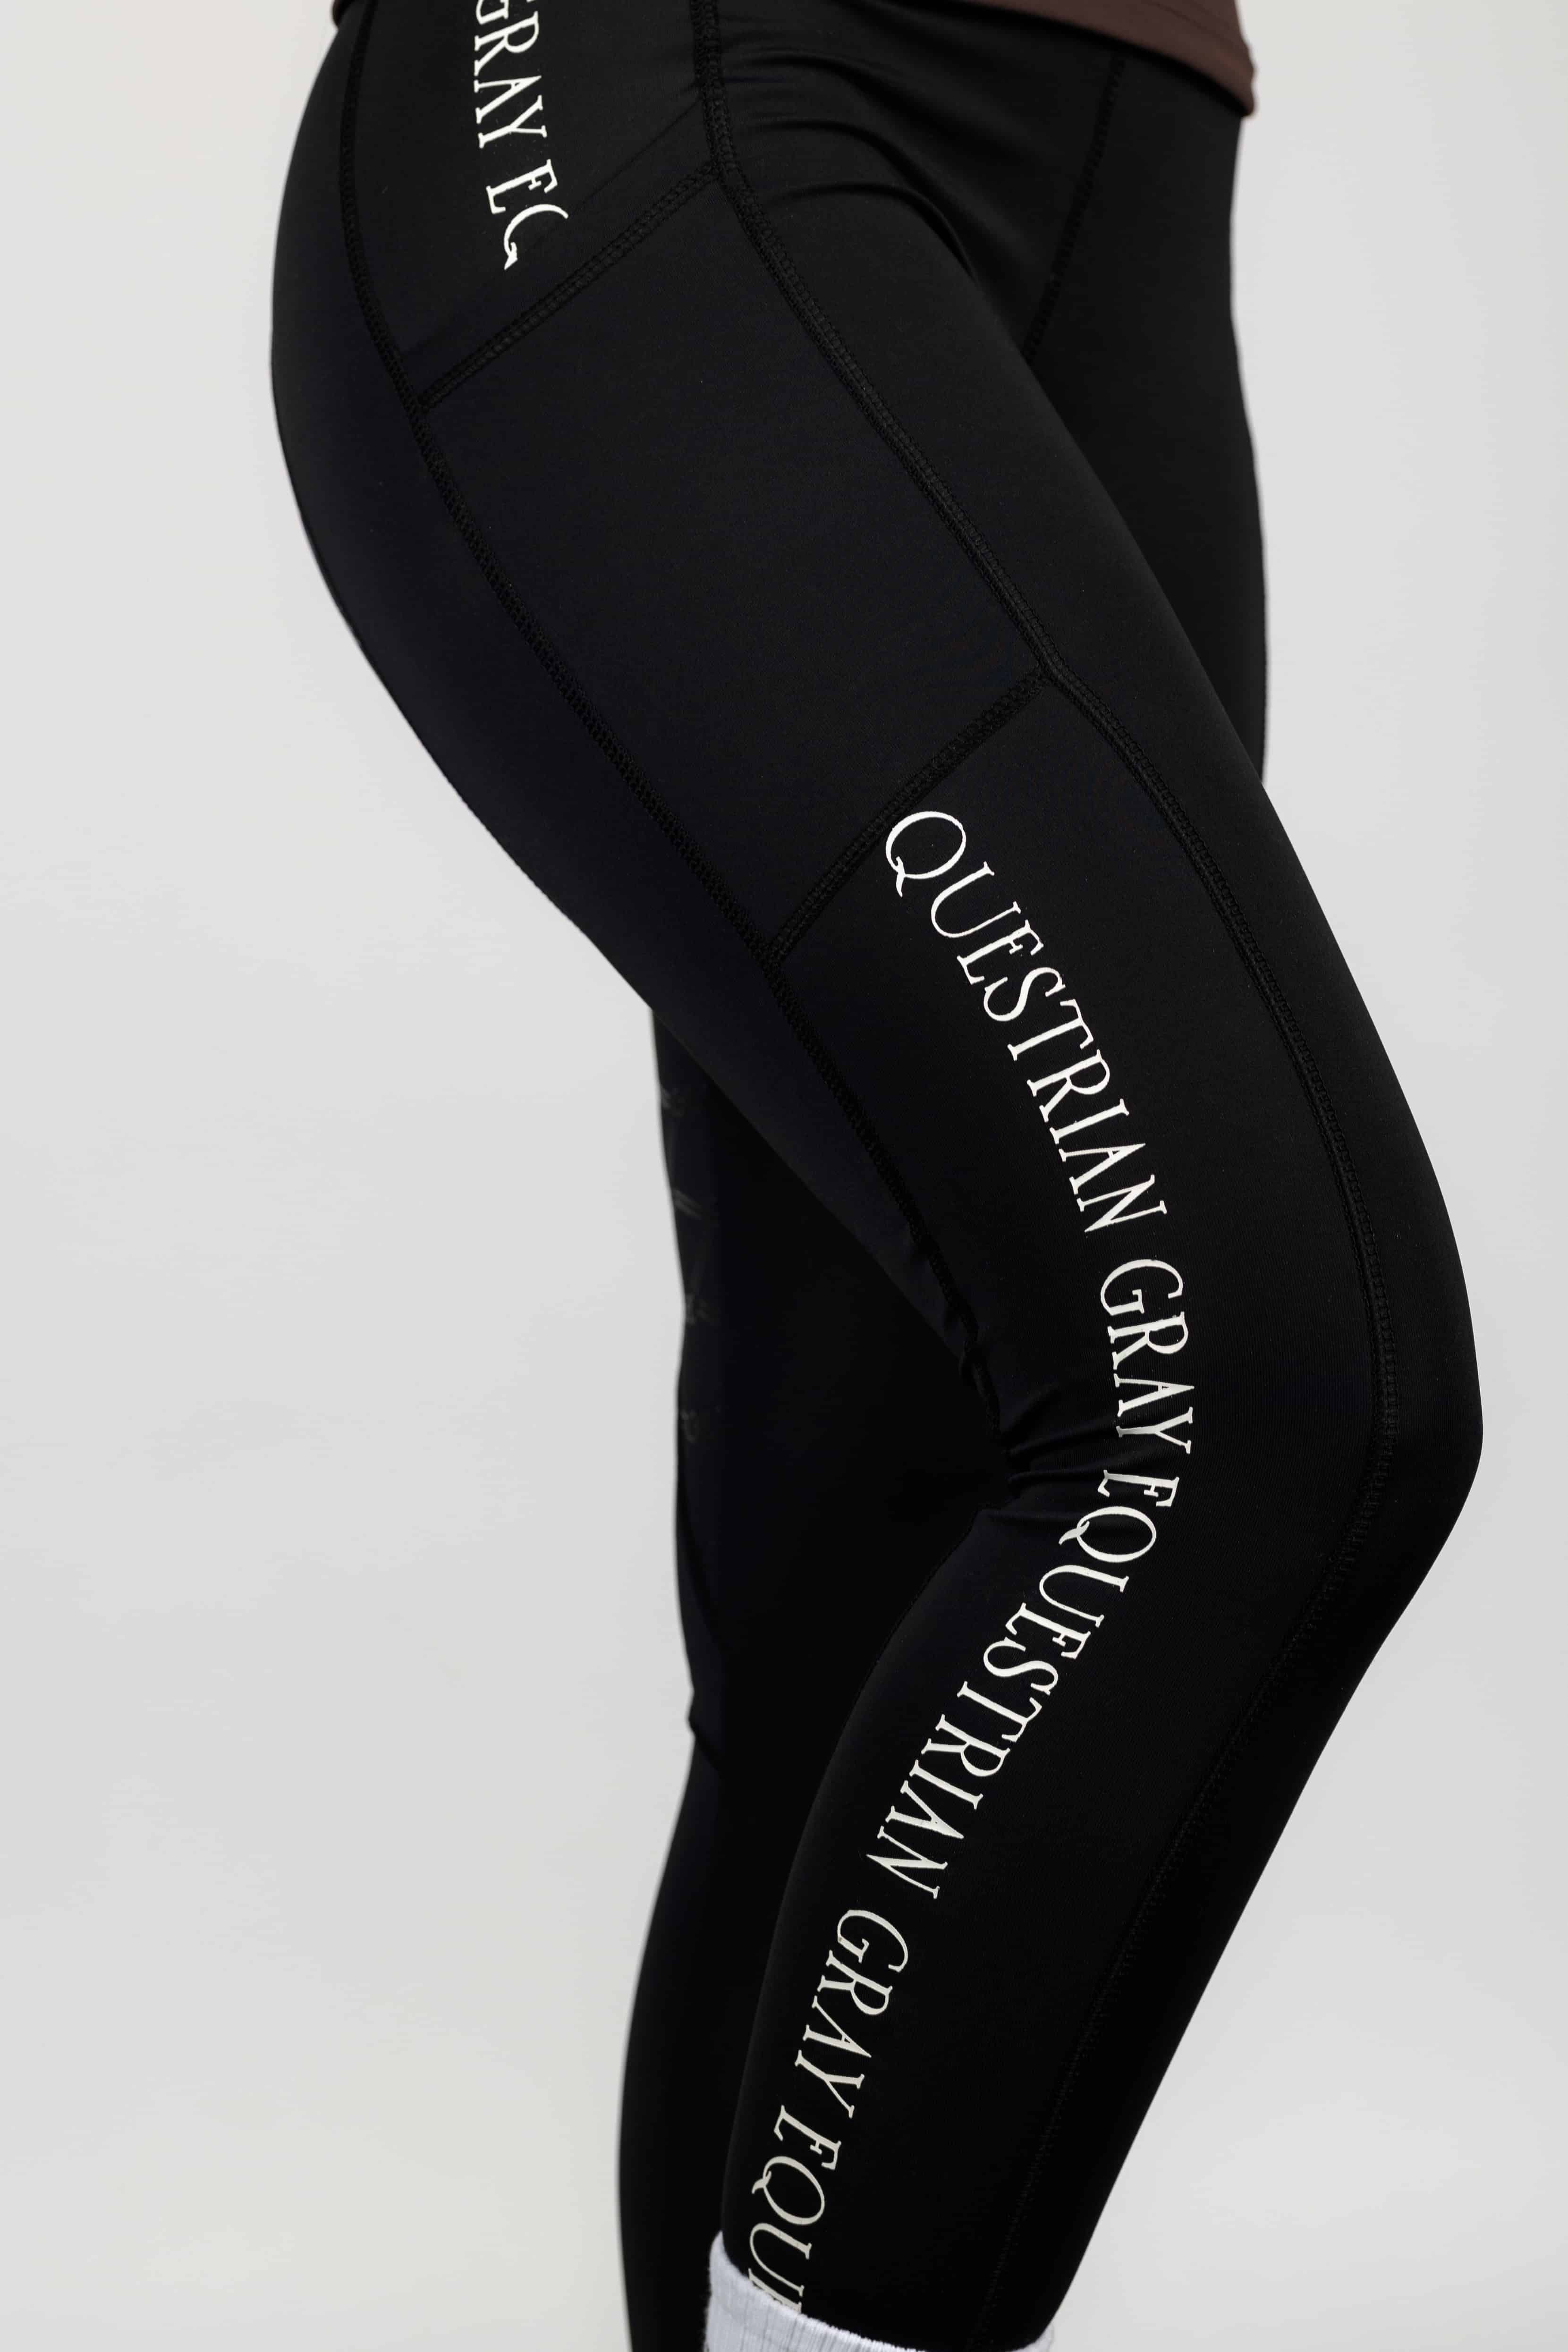 A close up of the subtle white Grey Equestrian branding on our black renew riding leggings.